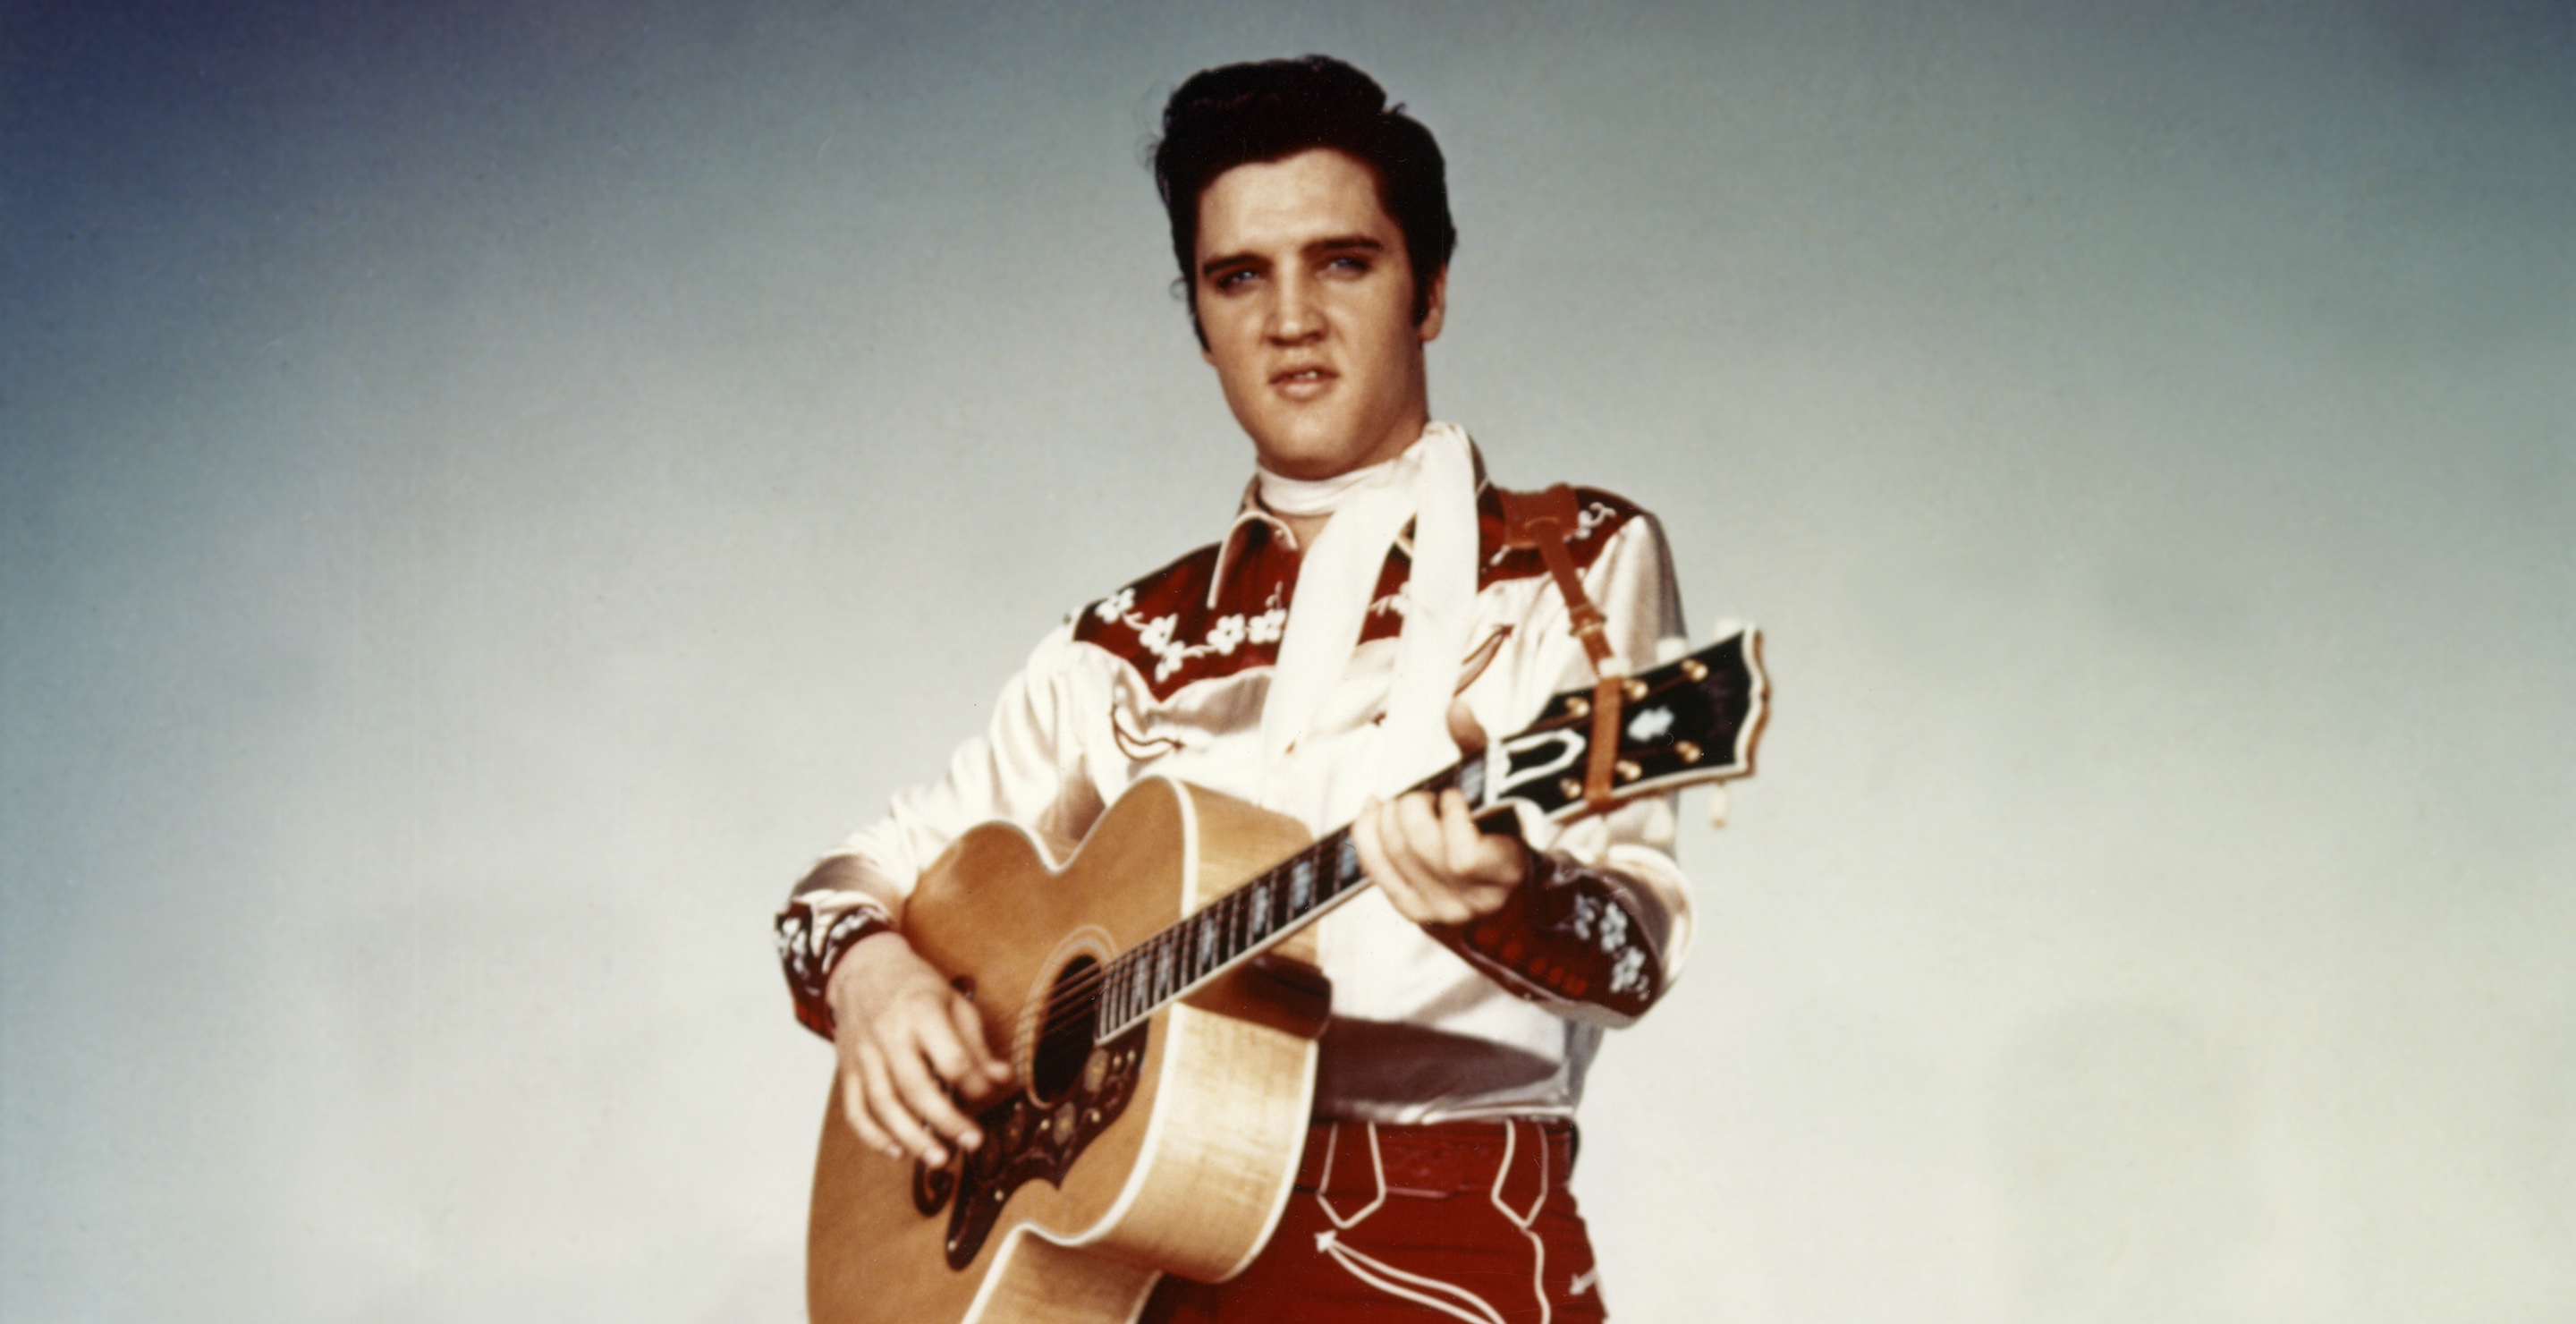 American singer and actor Elvis Presley promoting the movie Loving You, written and directed by Hal Kanter.